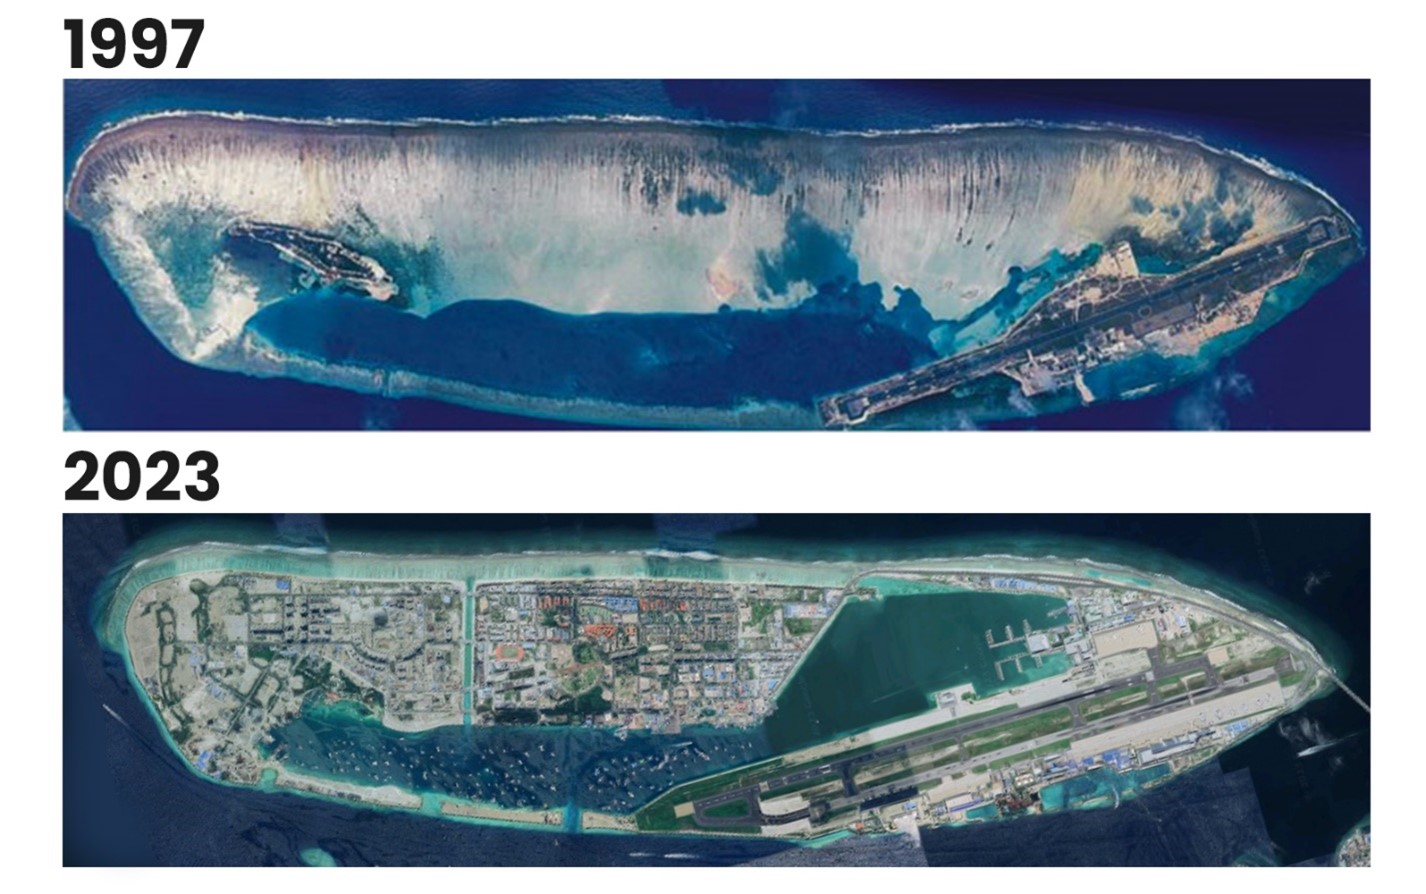 Satellite image of Hulhumalé from 1997 and 2023 (Courtesy of the Housing Development Corporation of Maldives via UNDP-Maldives).